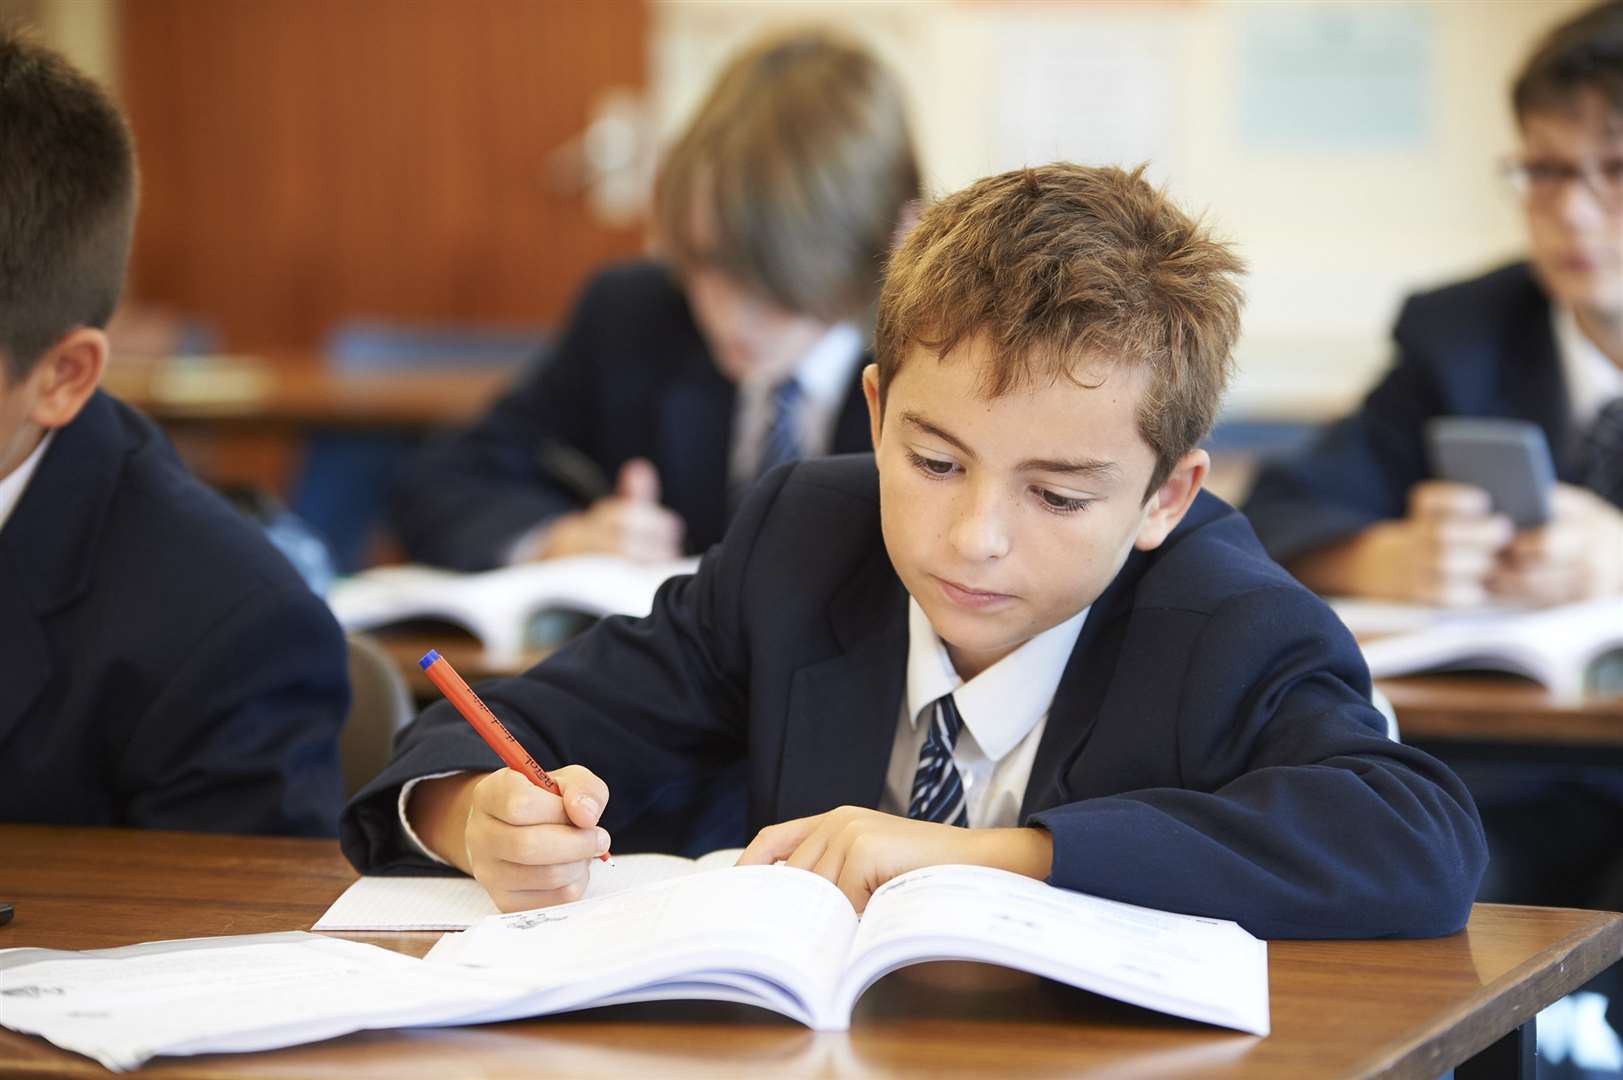 Small class sizes and a focus on engaging all our pupils as individuals maximises their achievement in every lesson.